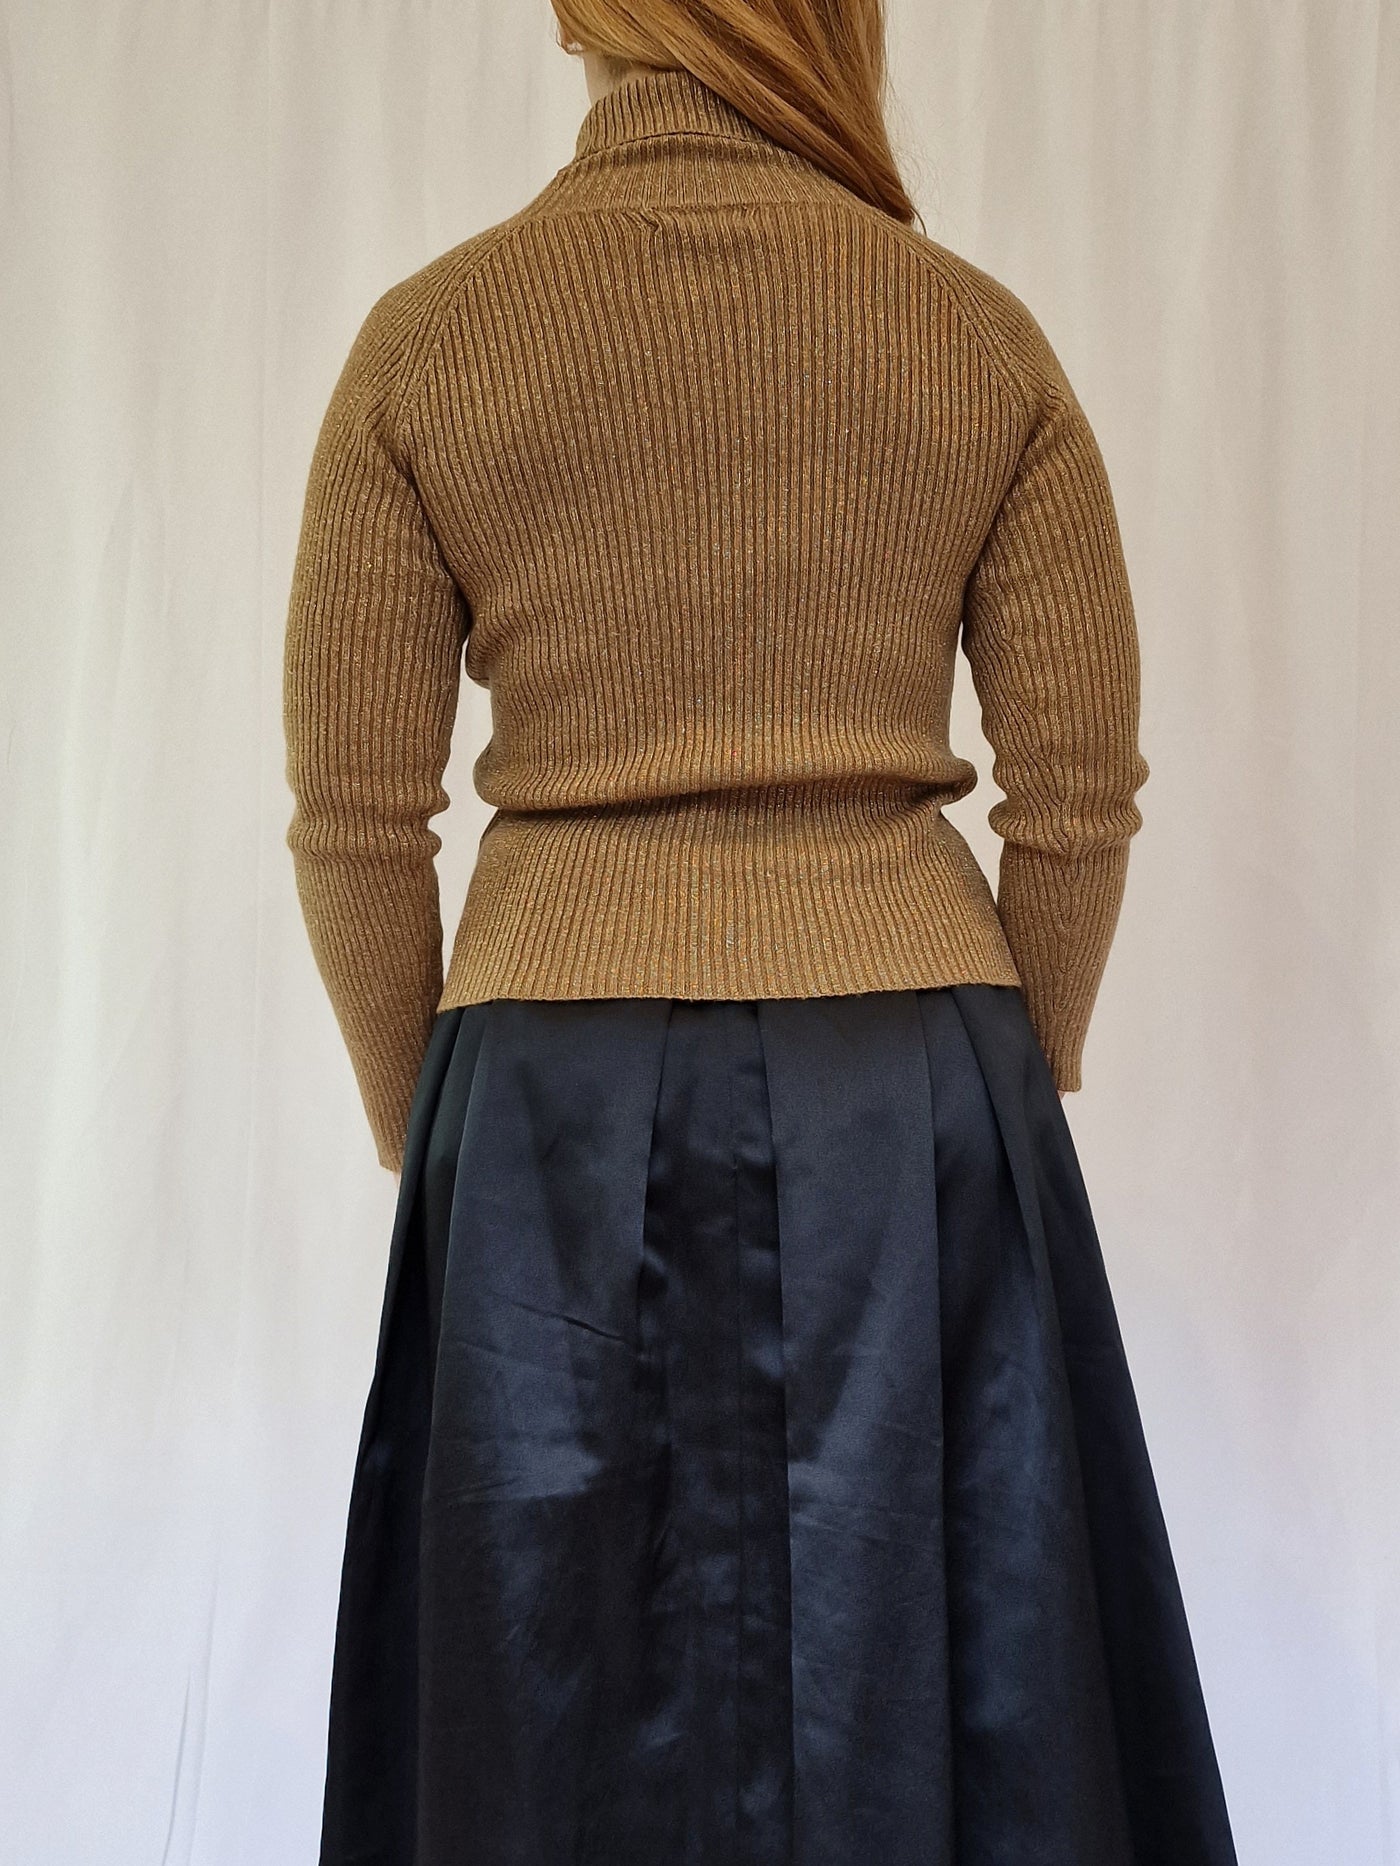 Vintage Polo Neck Long Sleeved Knitted Top with Gold Thread - XS